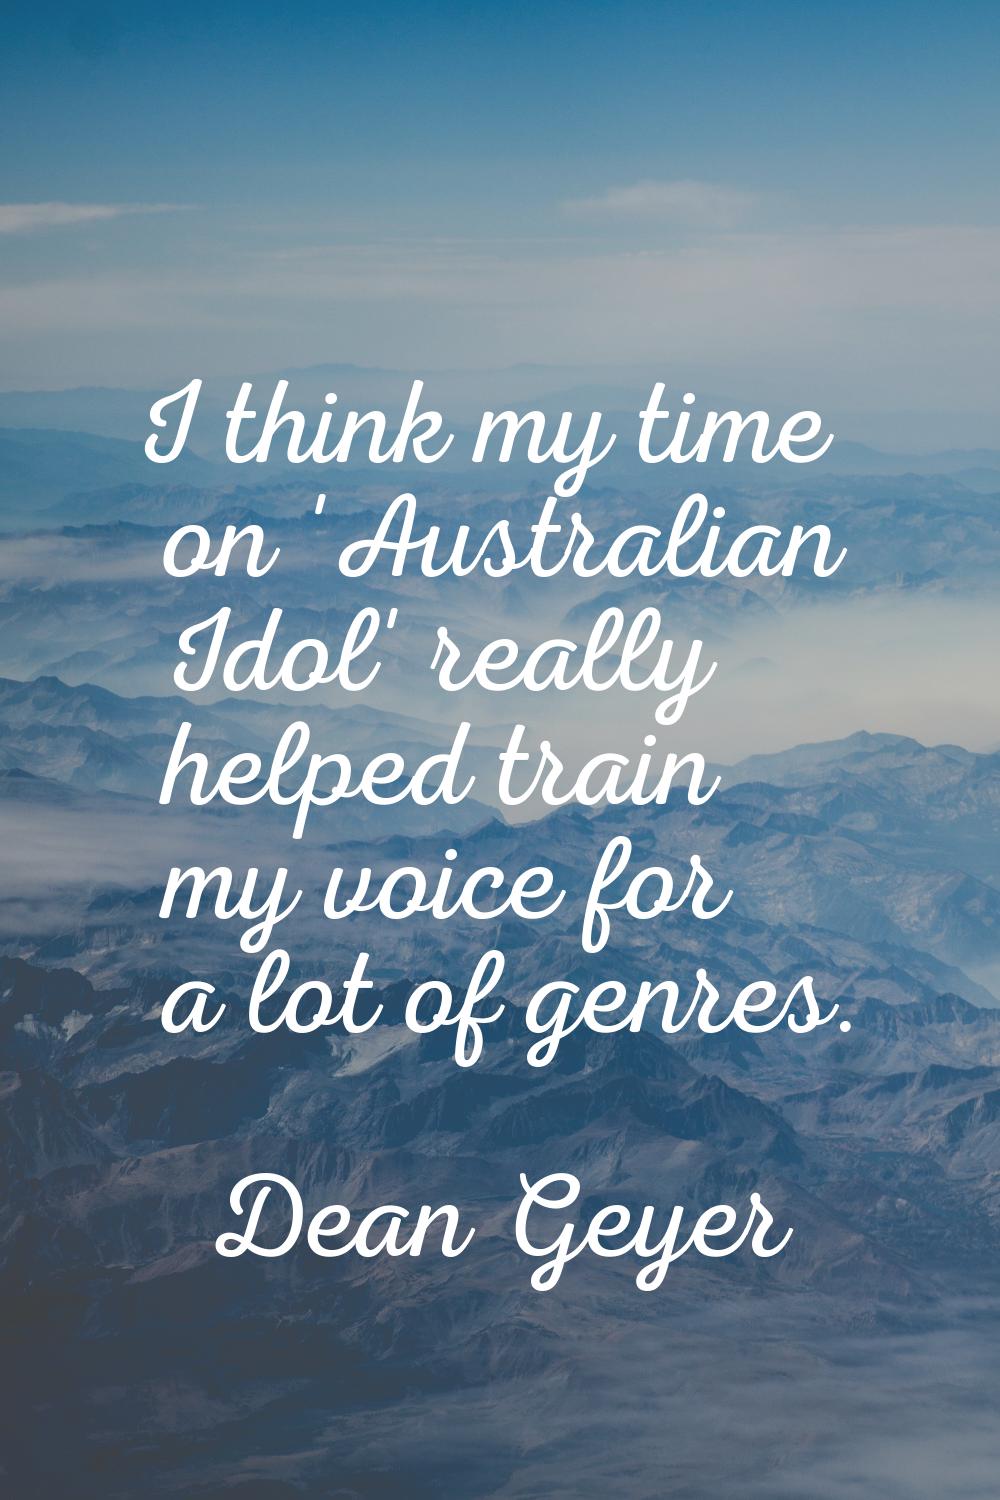 I think my time on 'Australian Idol' really helped train my voice for a lot of genres.